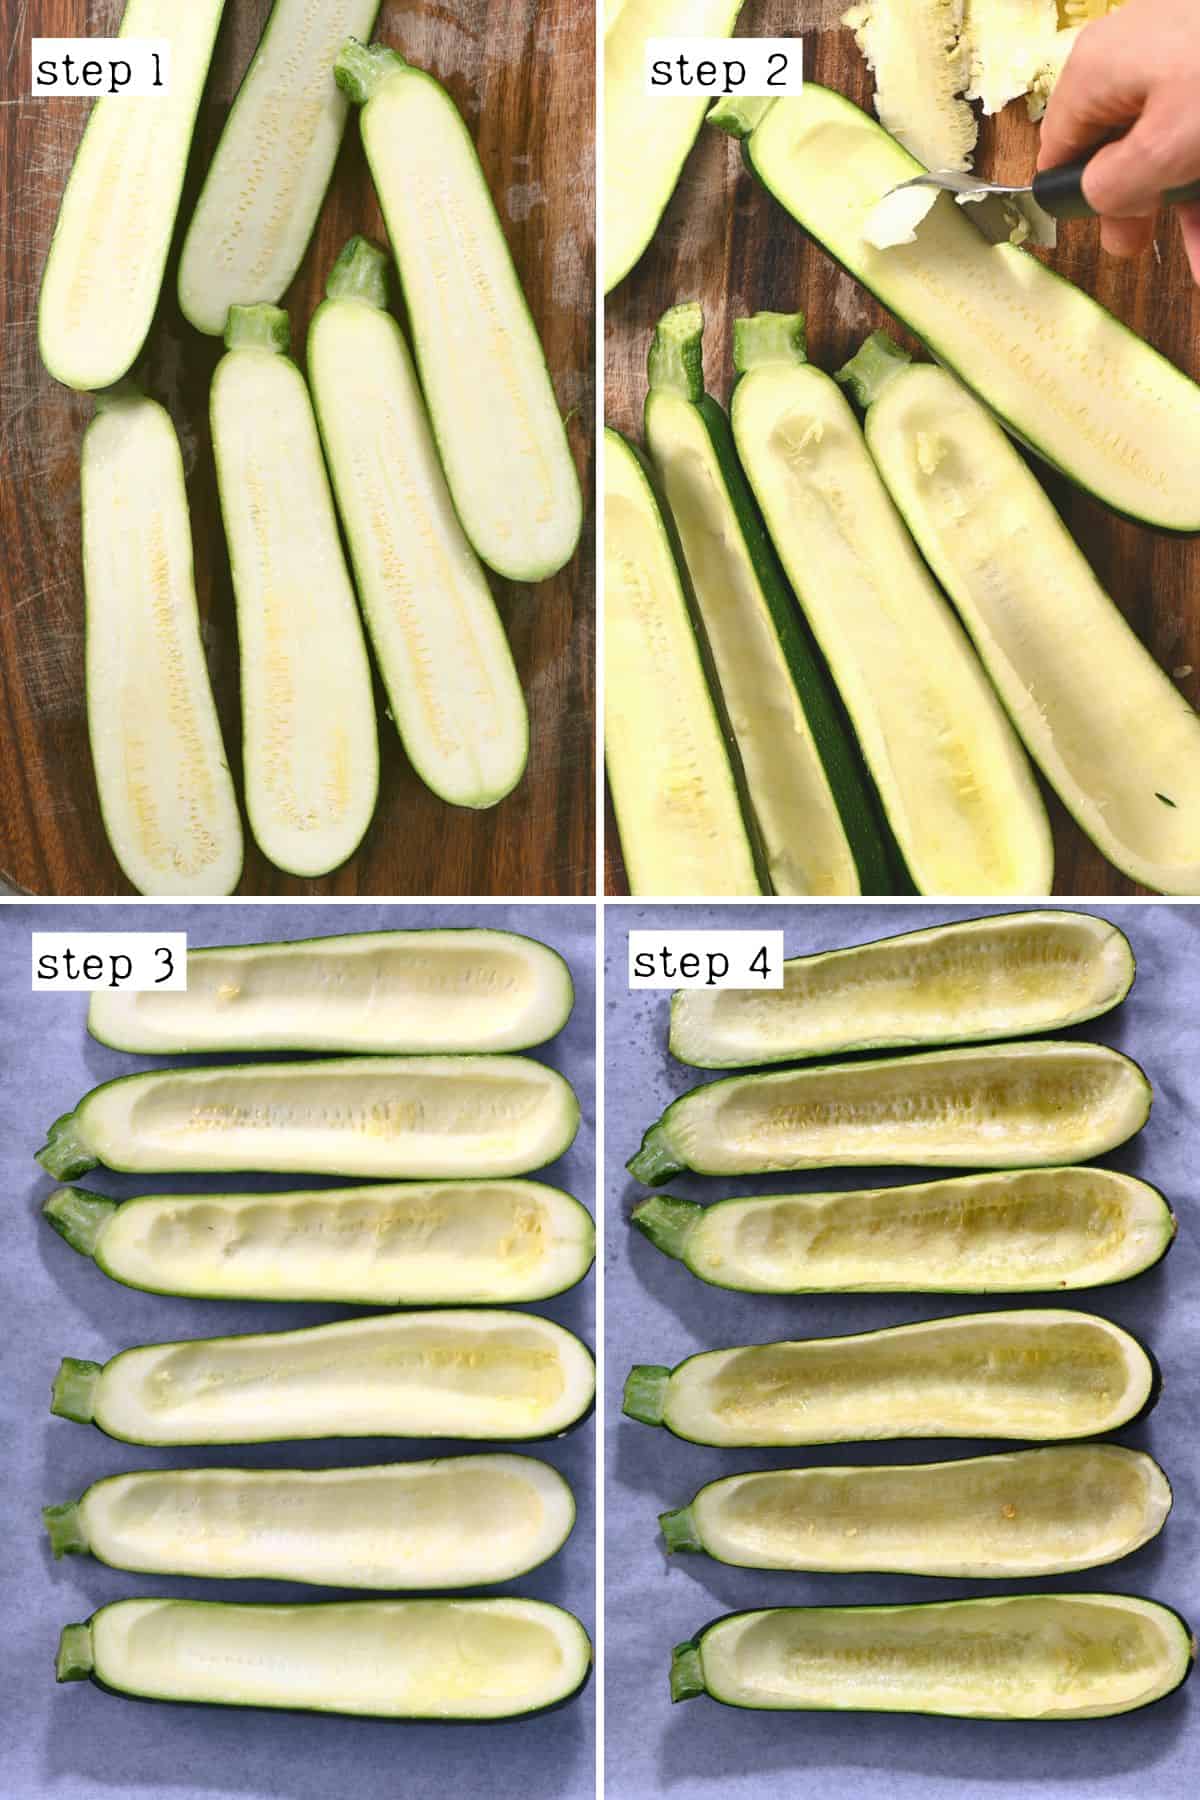 Steps for prepping zucchini